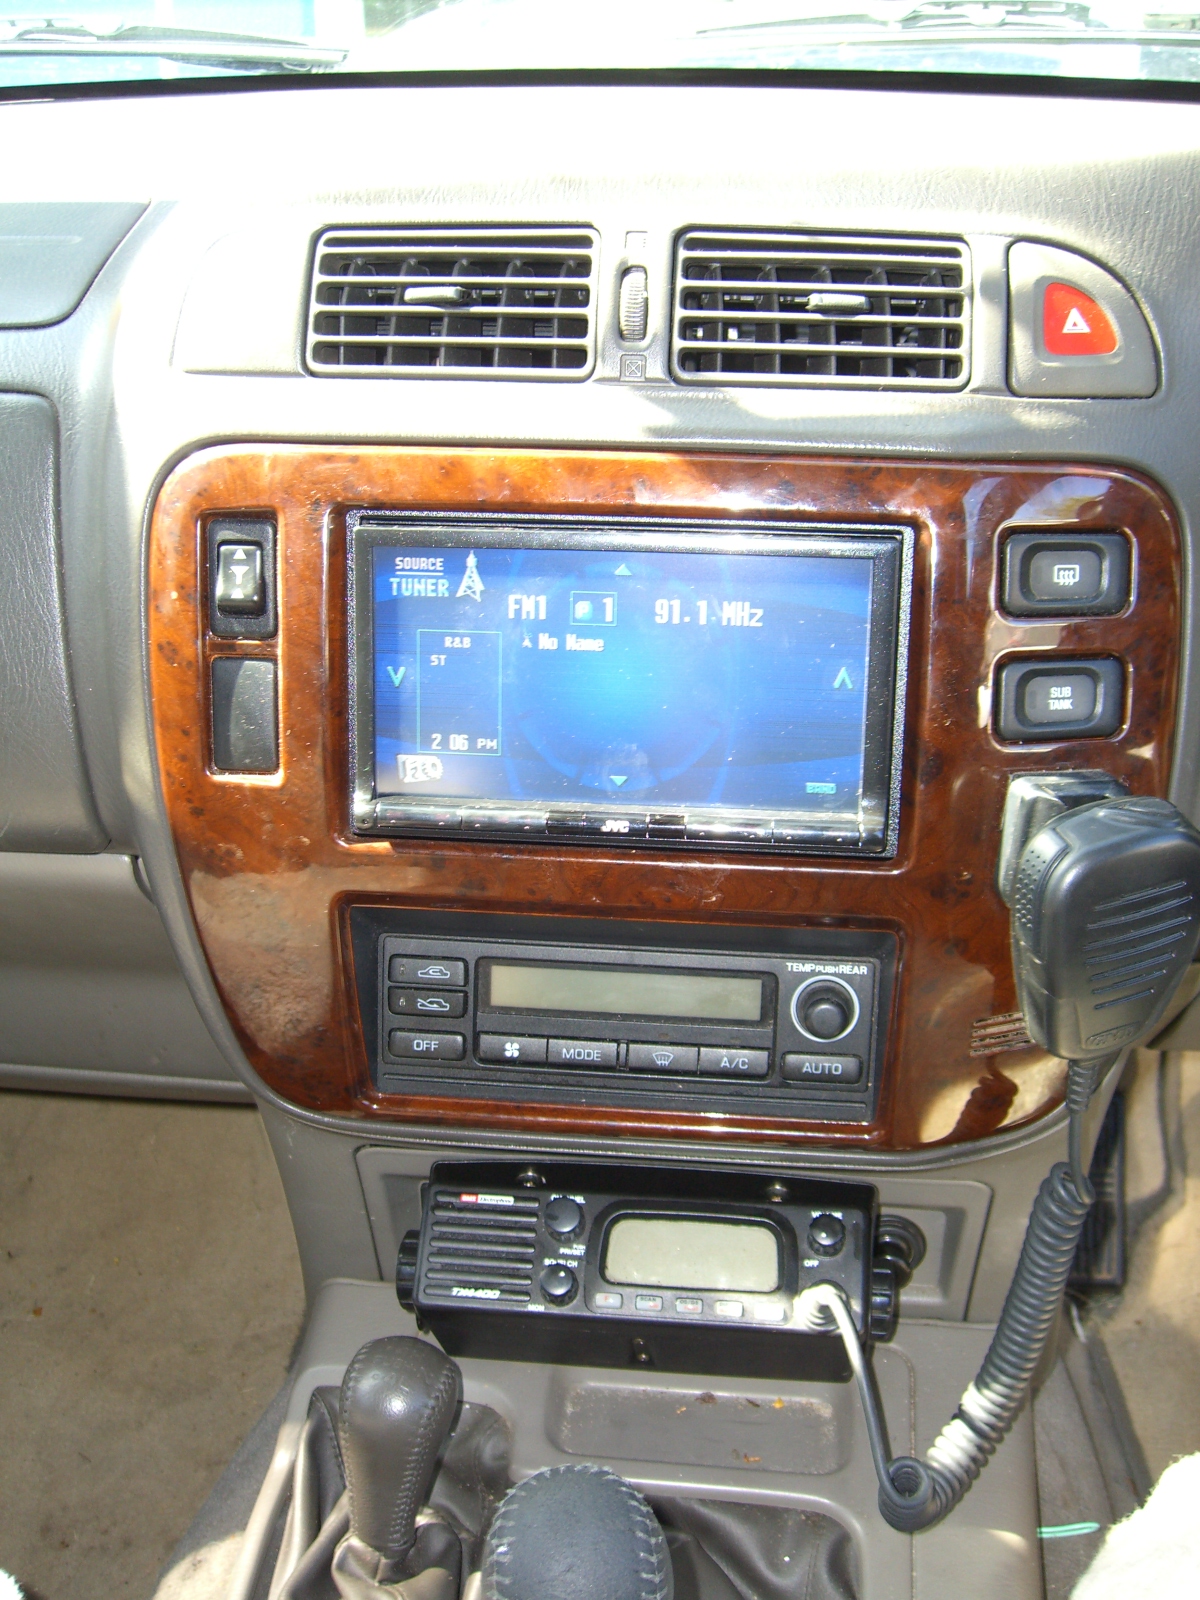 Nissan Patrol JVC DVD player with UHF and clarion amplifier dual 12inch subwoofers